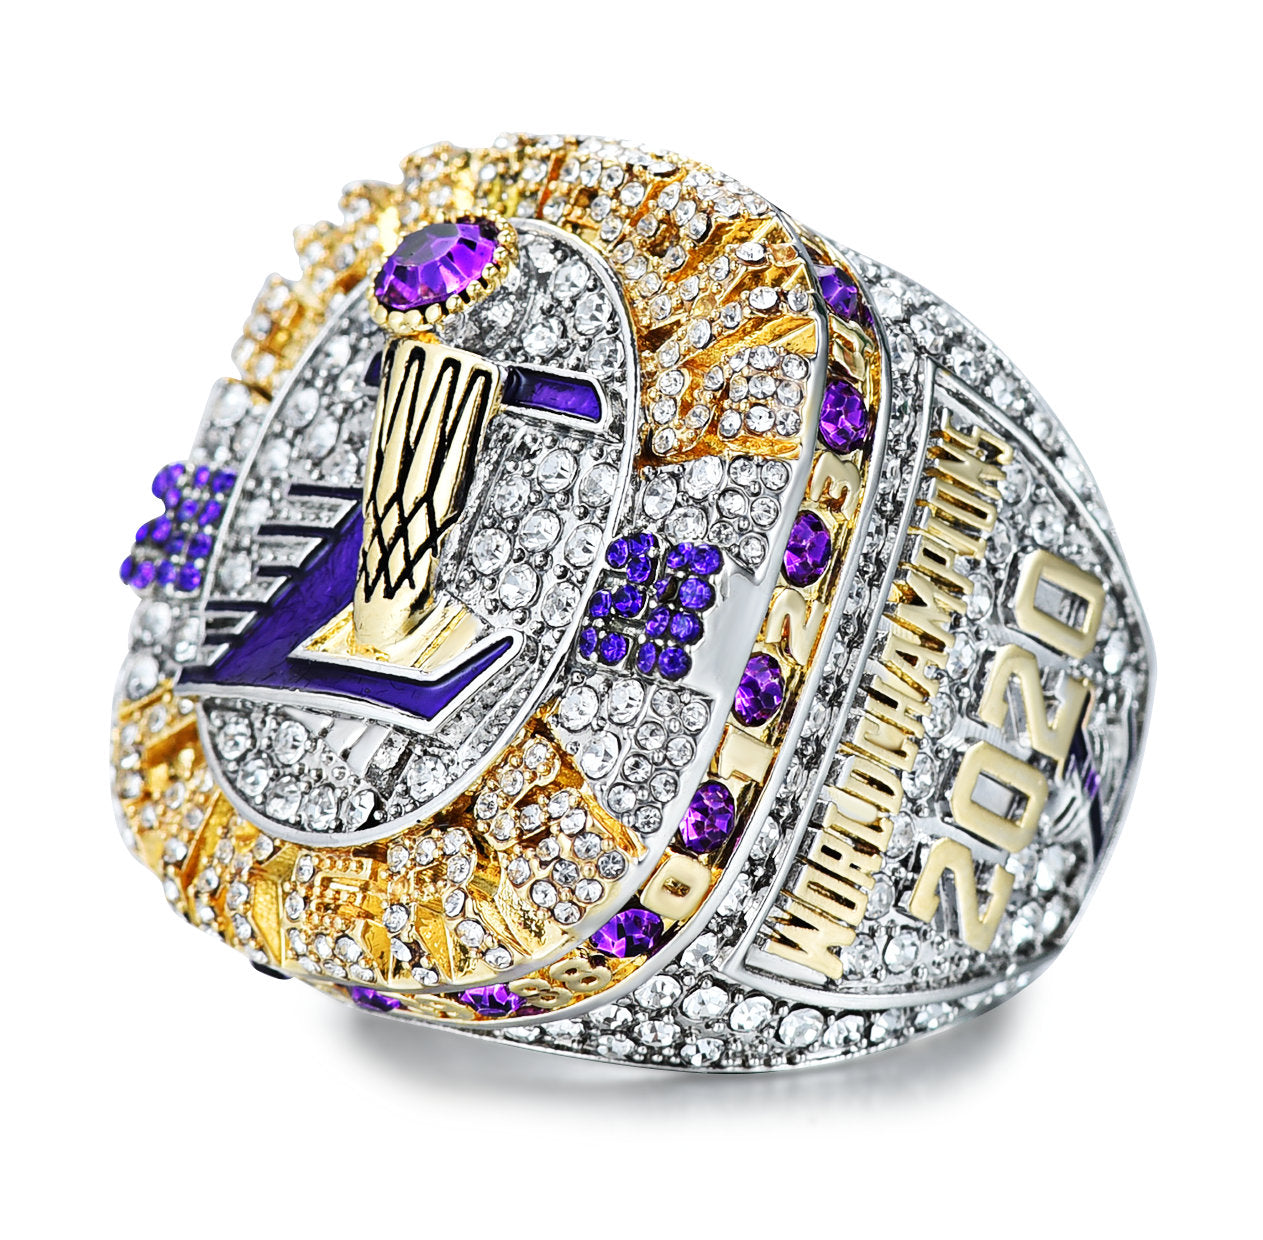 XXSLY Replica Of The 2020 Lakers Championship Ring, LA Champions Ring with  Champions Wooden Box, for Fans Collection Souvenirs (Size : 12) :  : Fashion